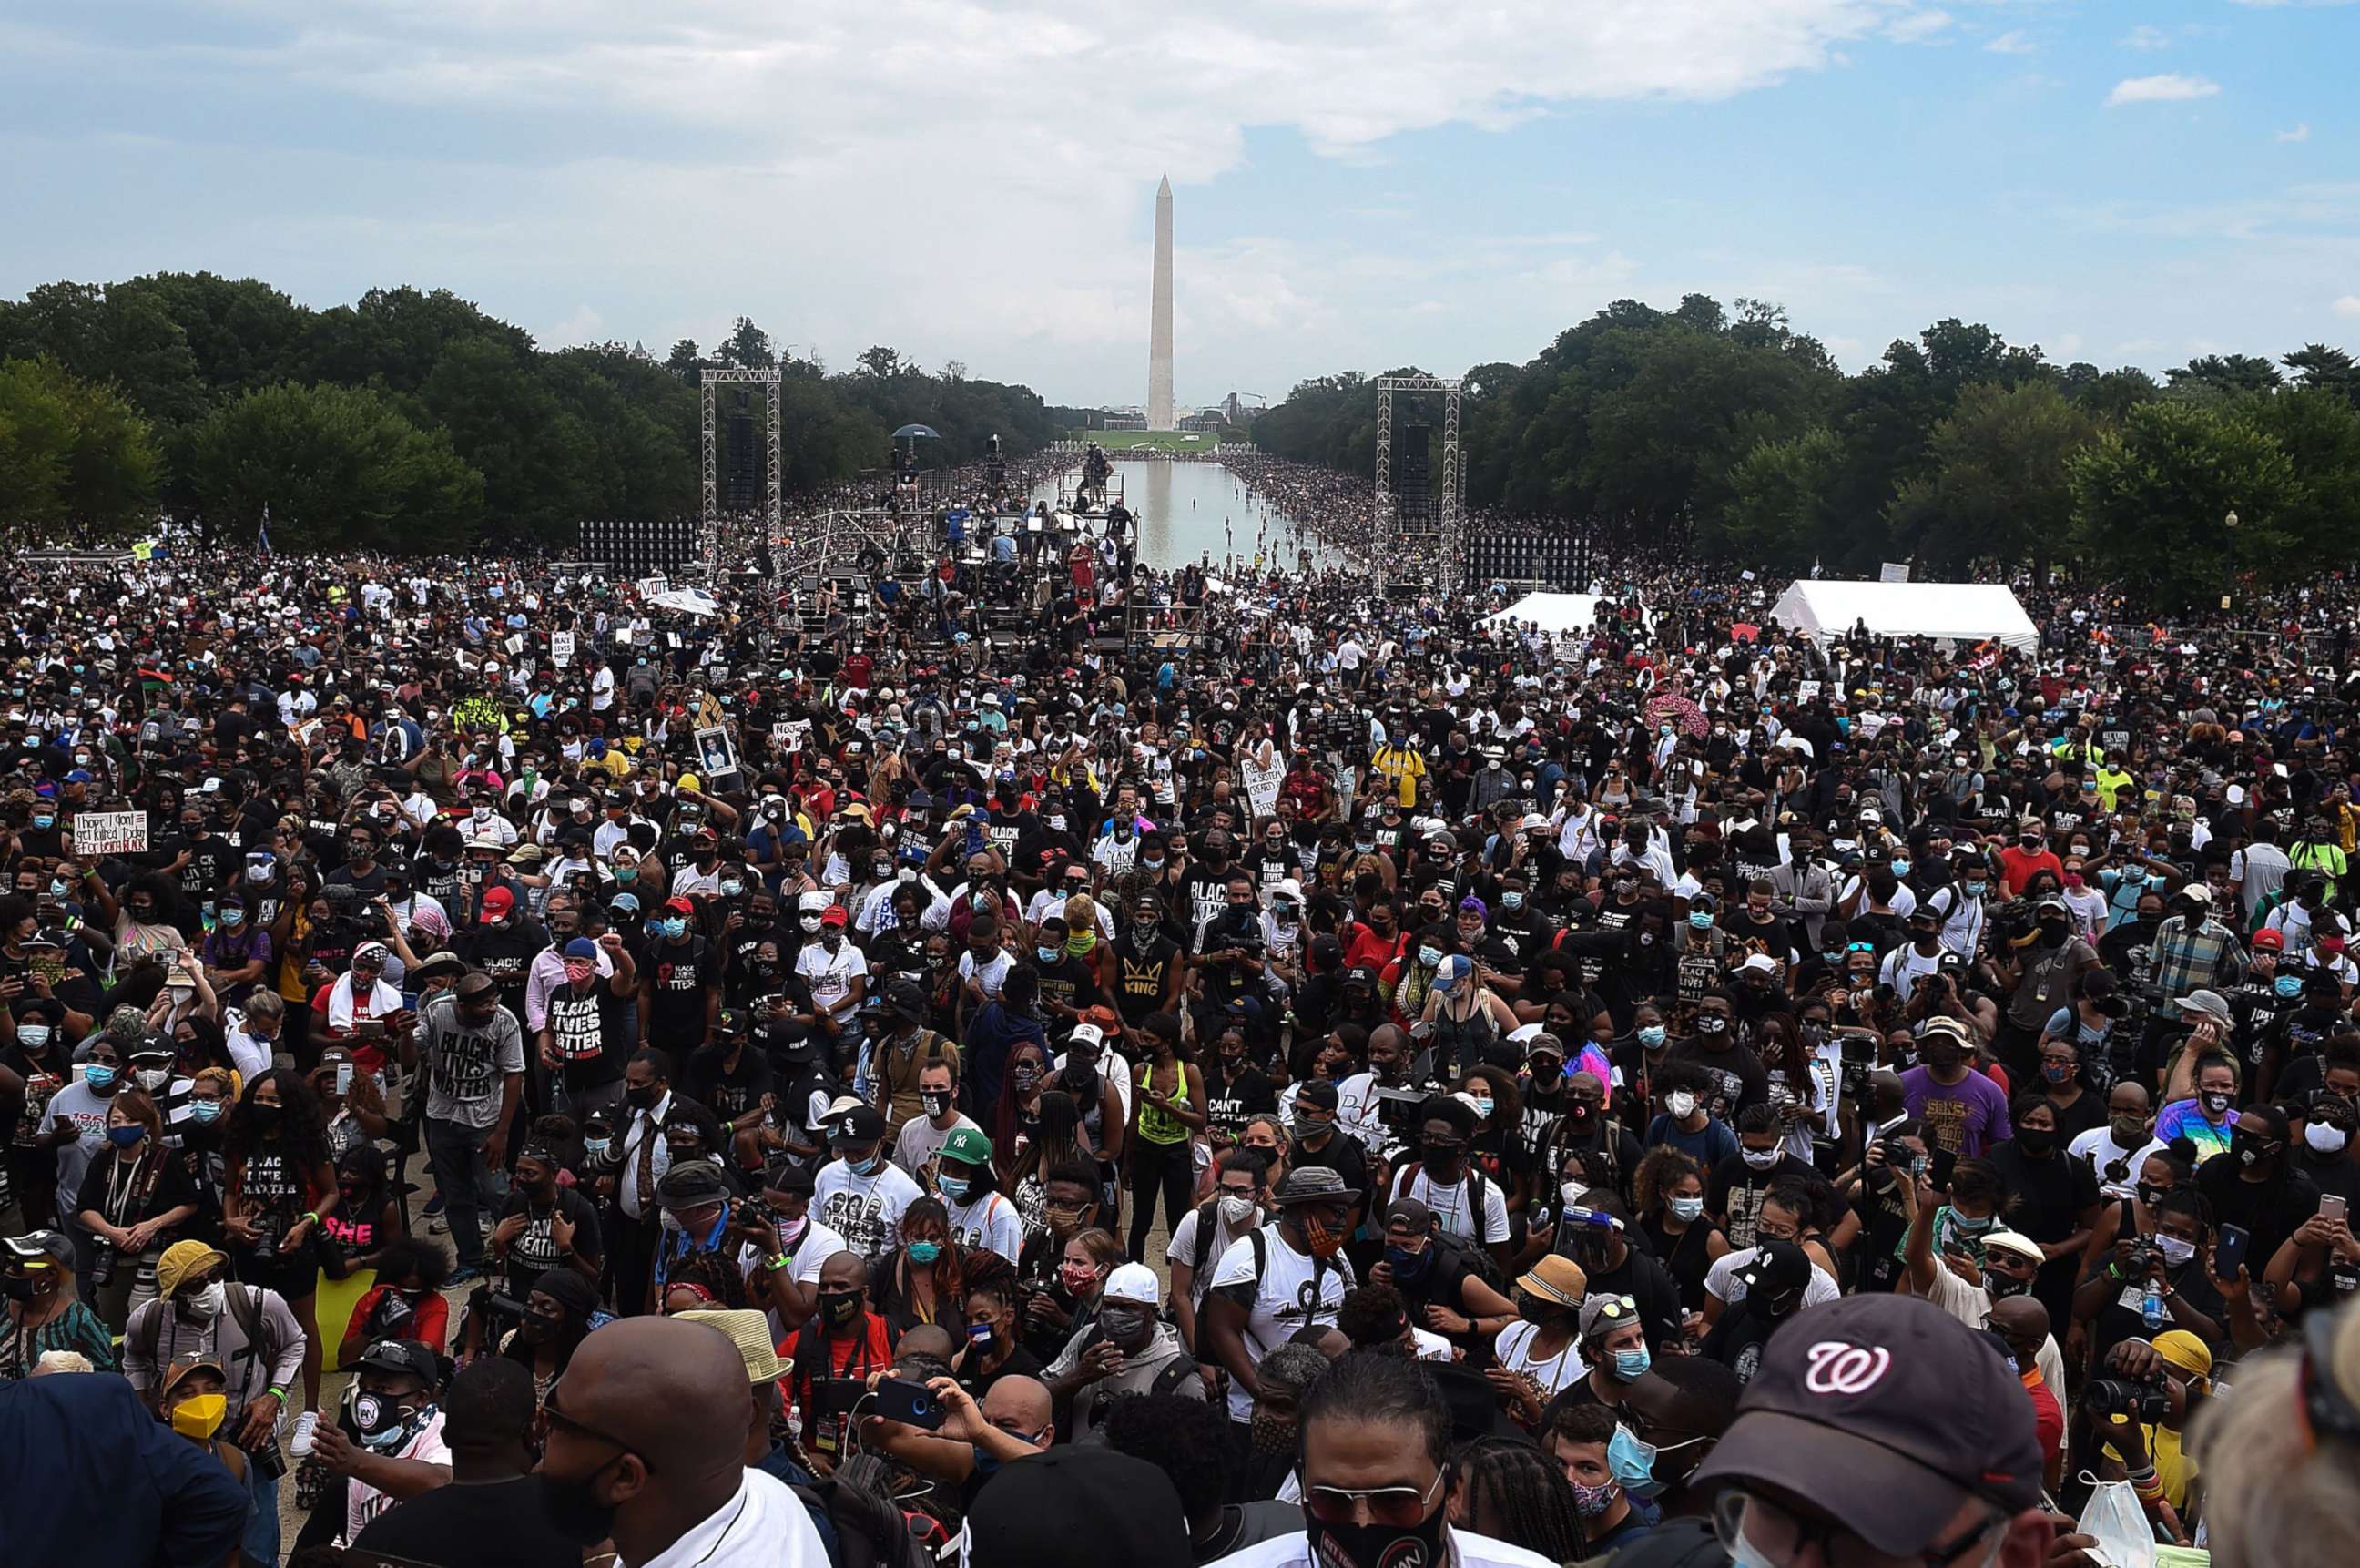 PHOTO: People attend the "Commitment March: Get Your Knee Off Our Necks" protest against racism and police brutality, Aug. 28, 2020, in Washington, D.C.